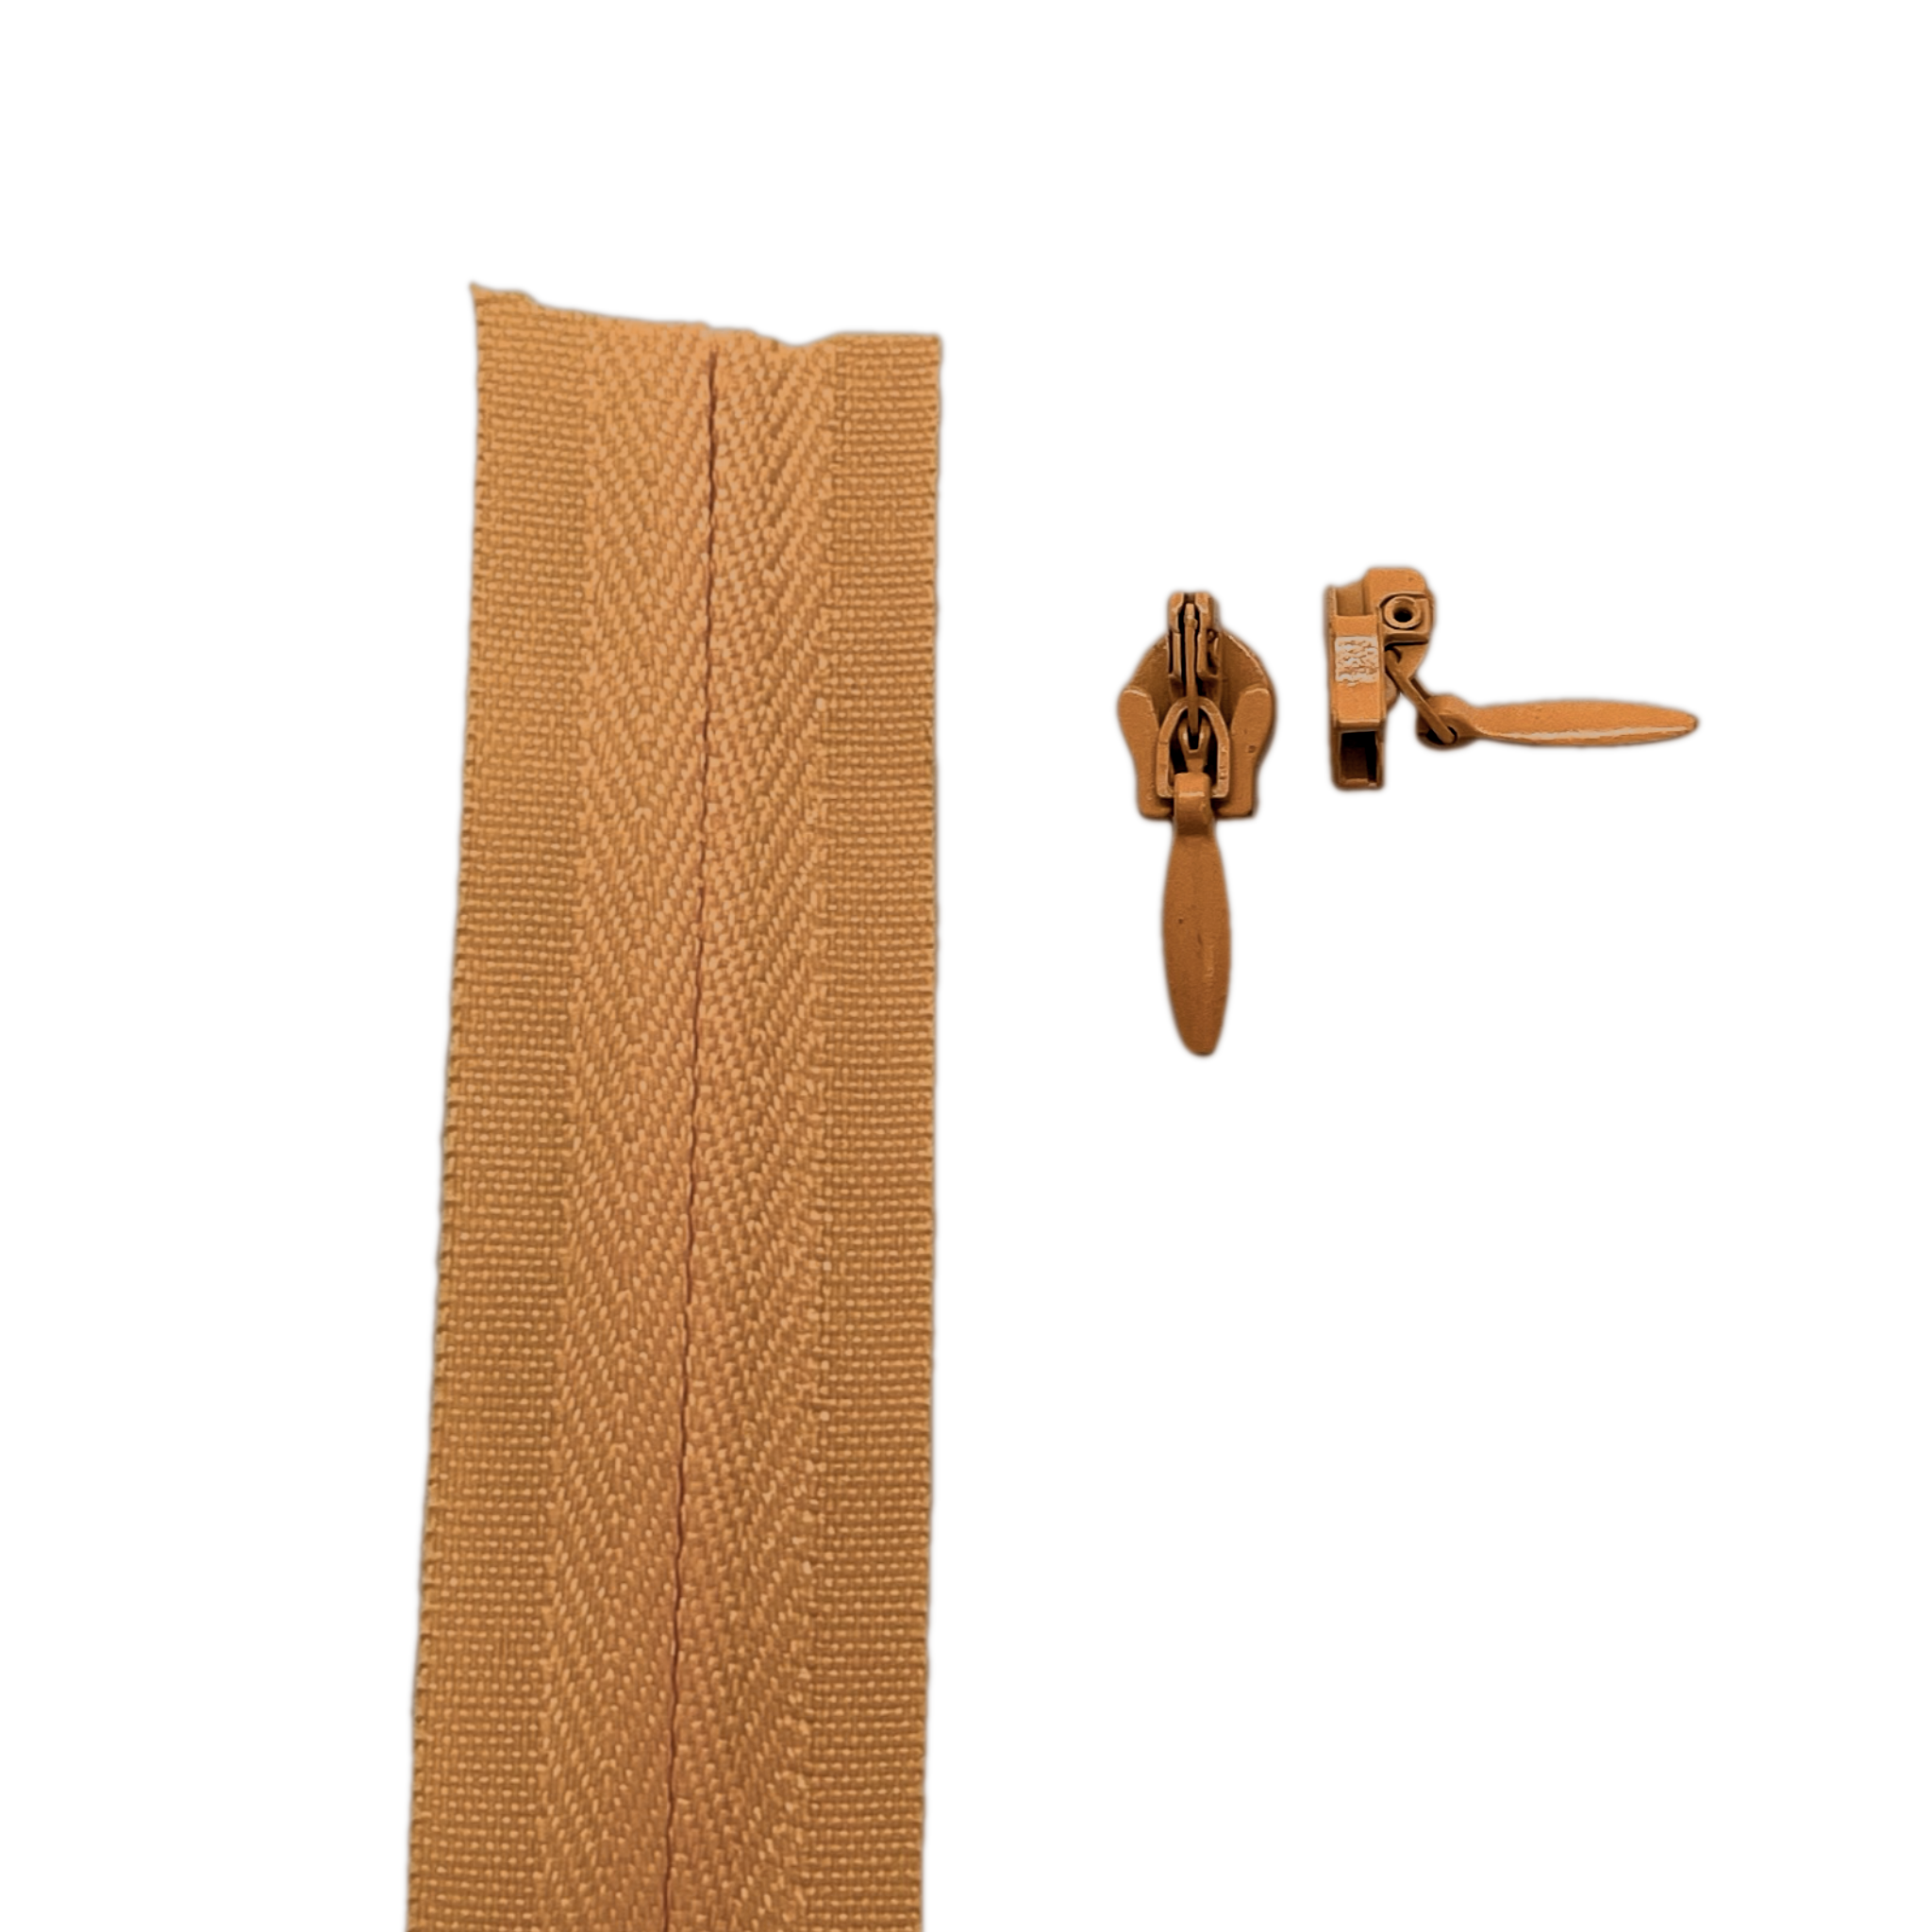 autumn gold or brown Invisible continuous zipper roll in long chain style with sliders of 2 per metre